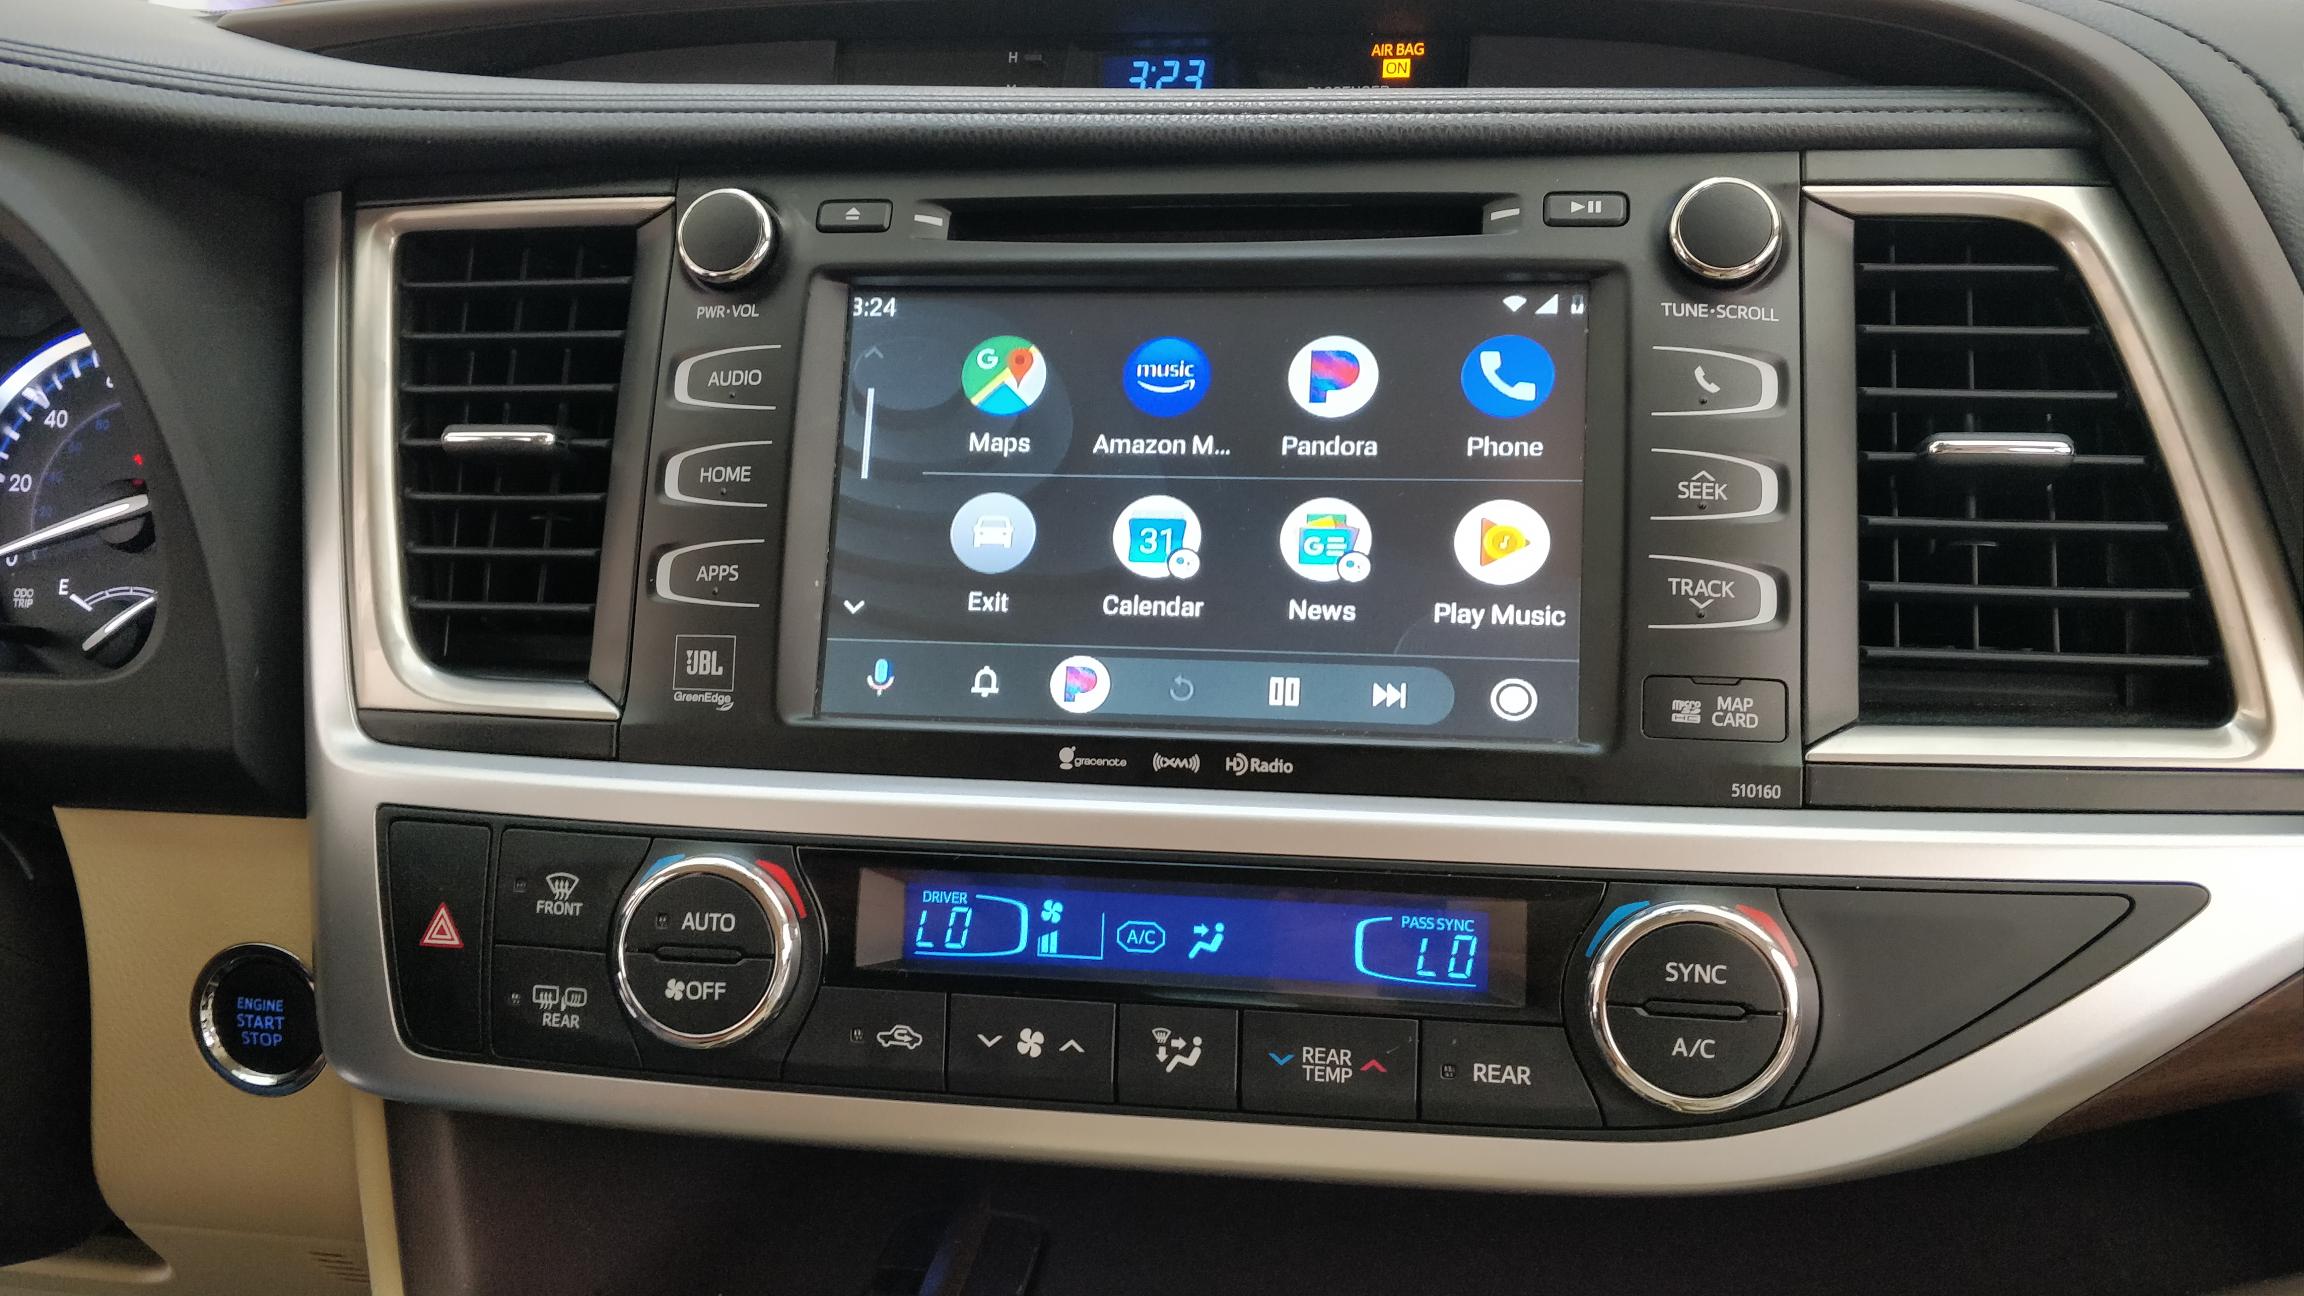 Android Auto with VLine VL2 on Toyota Highlander 2020 stereo